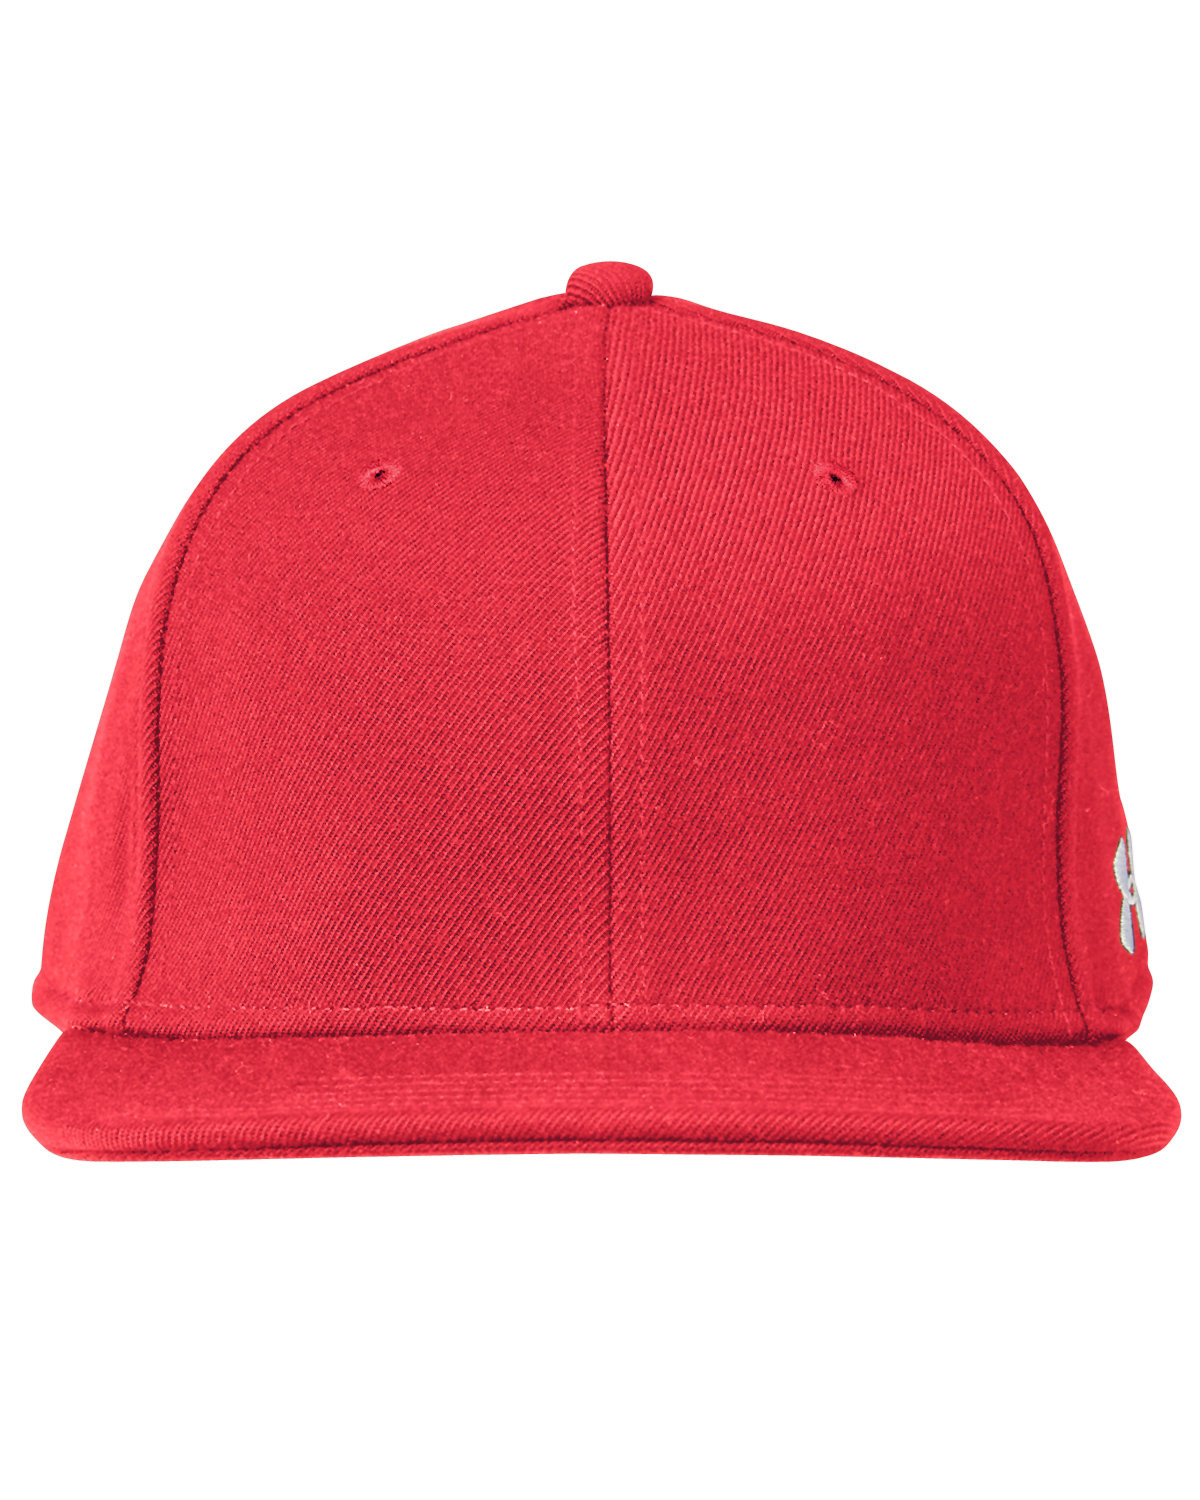 Under Armour SuperSale Flat Bill Cap- Solid RED/ WHT_600 